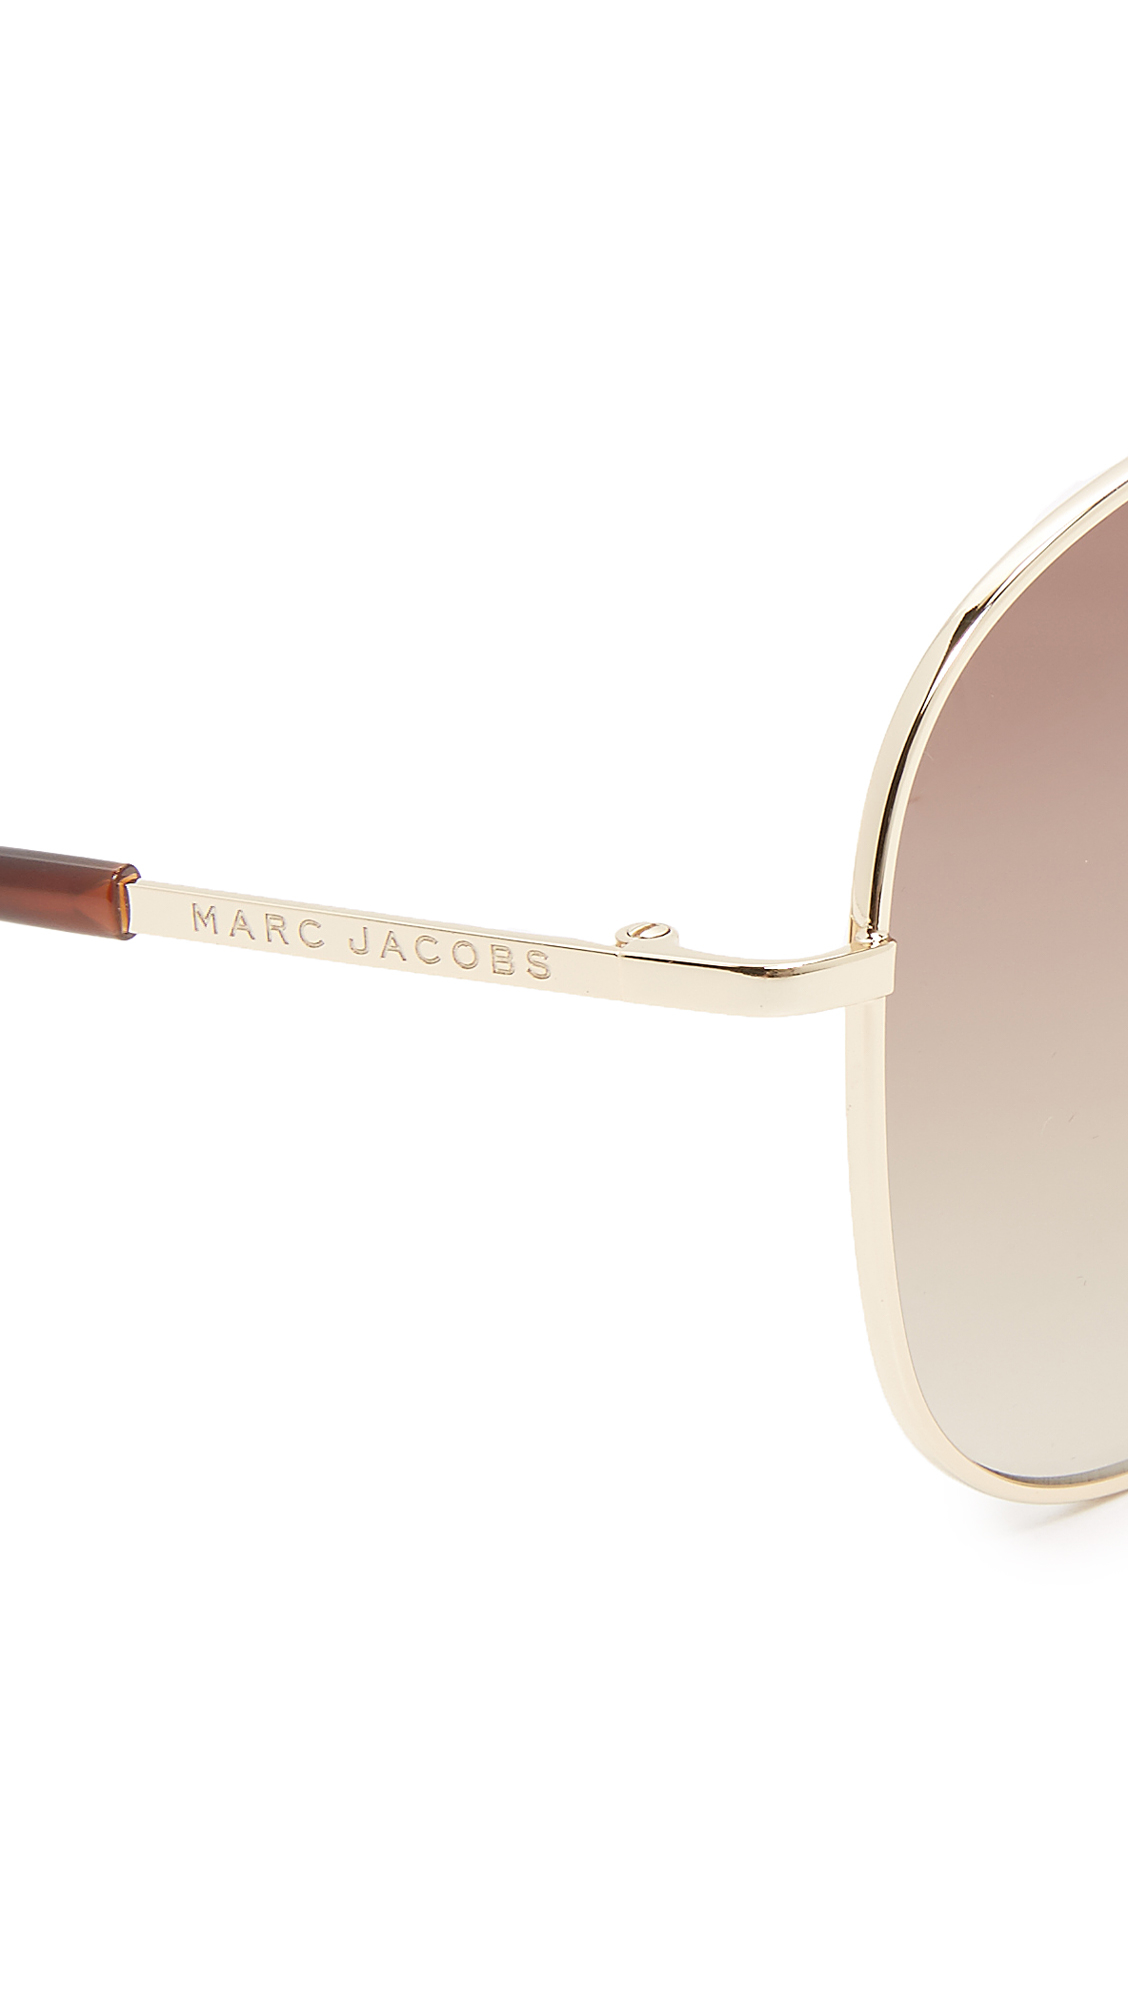 Marc Jacobs Metal Aviator Sunglasses in Gold/Brown (Brown) for Men - Lyst